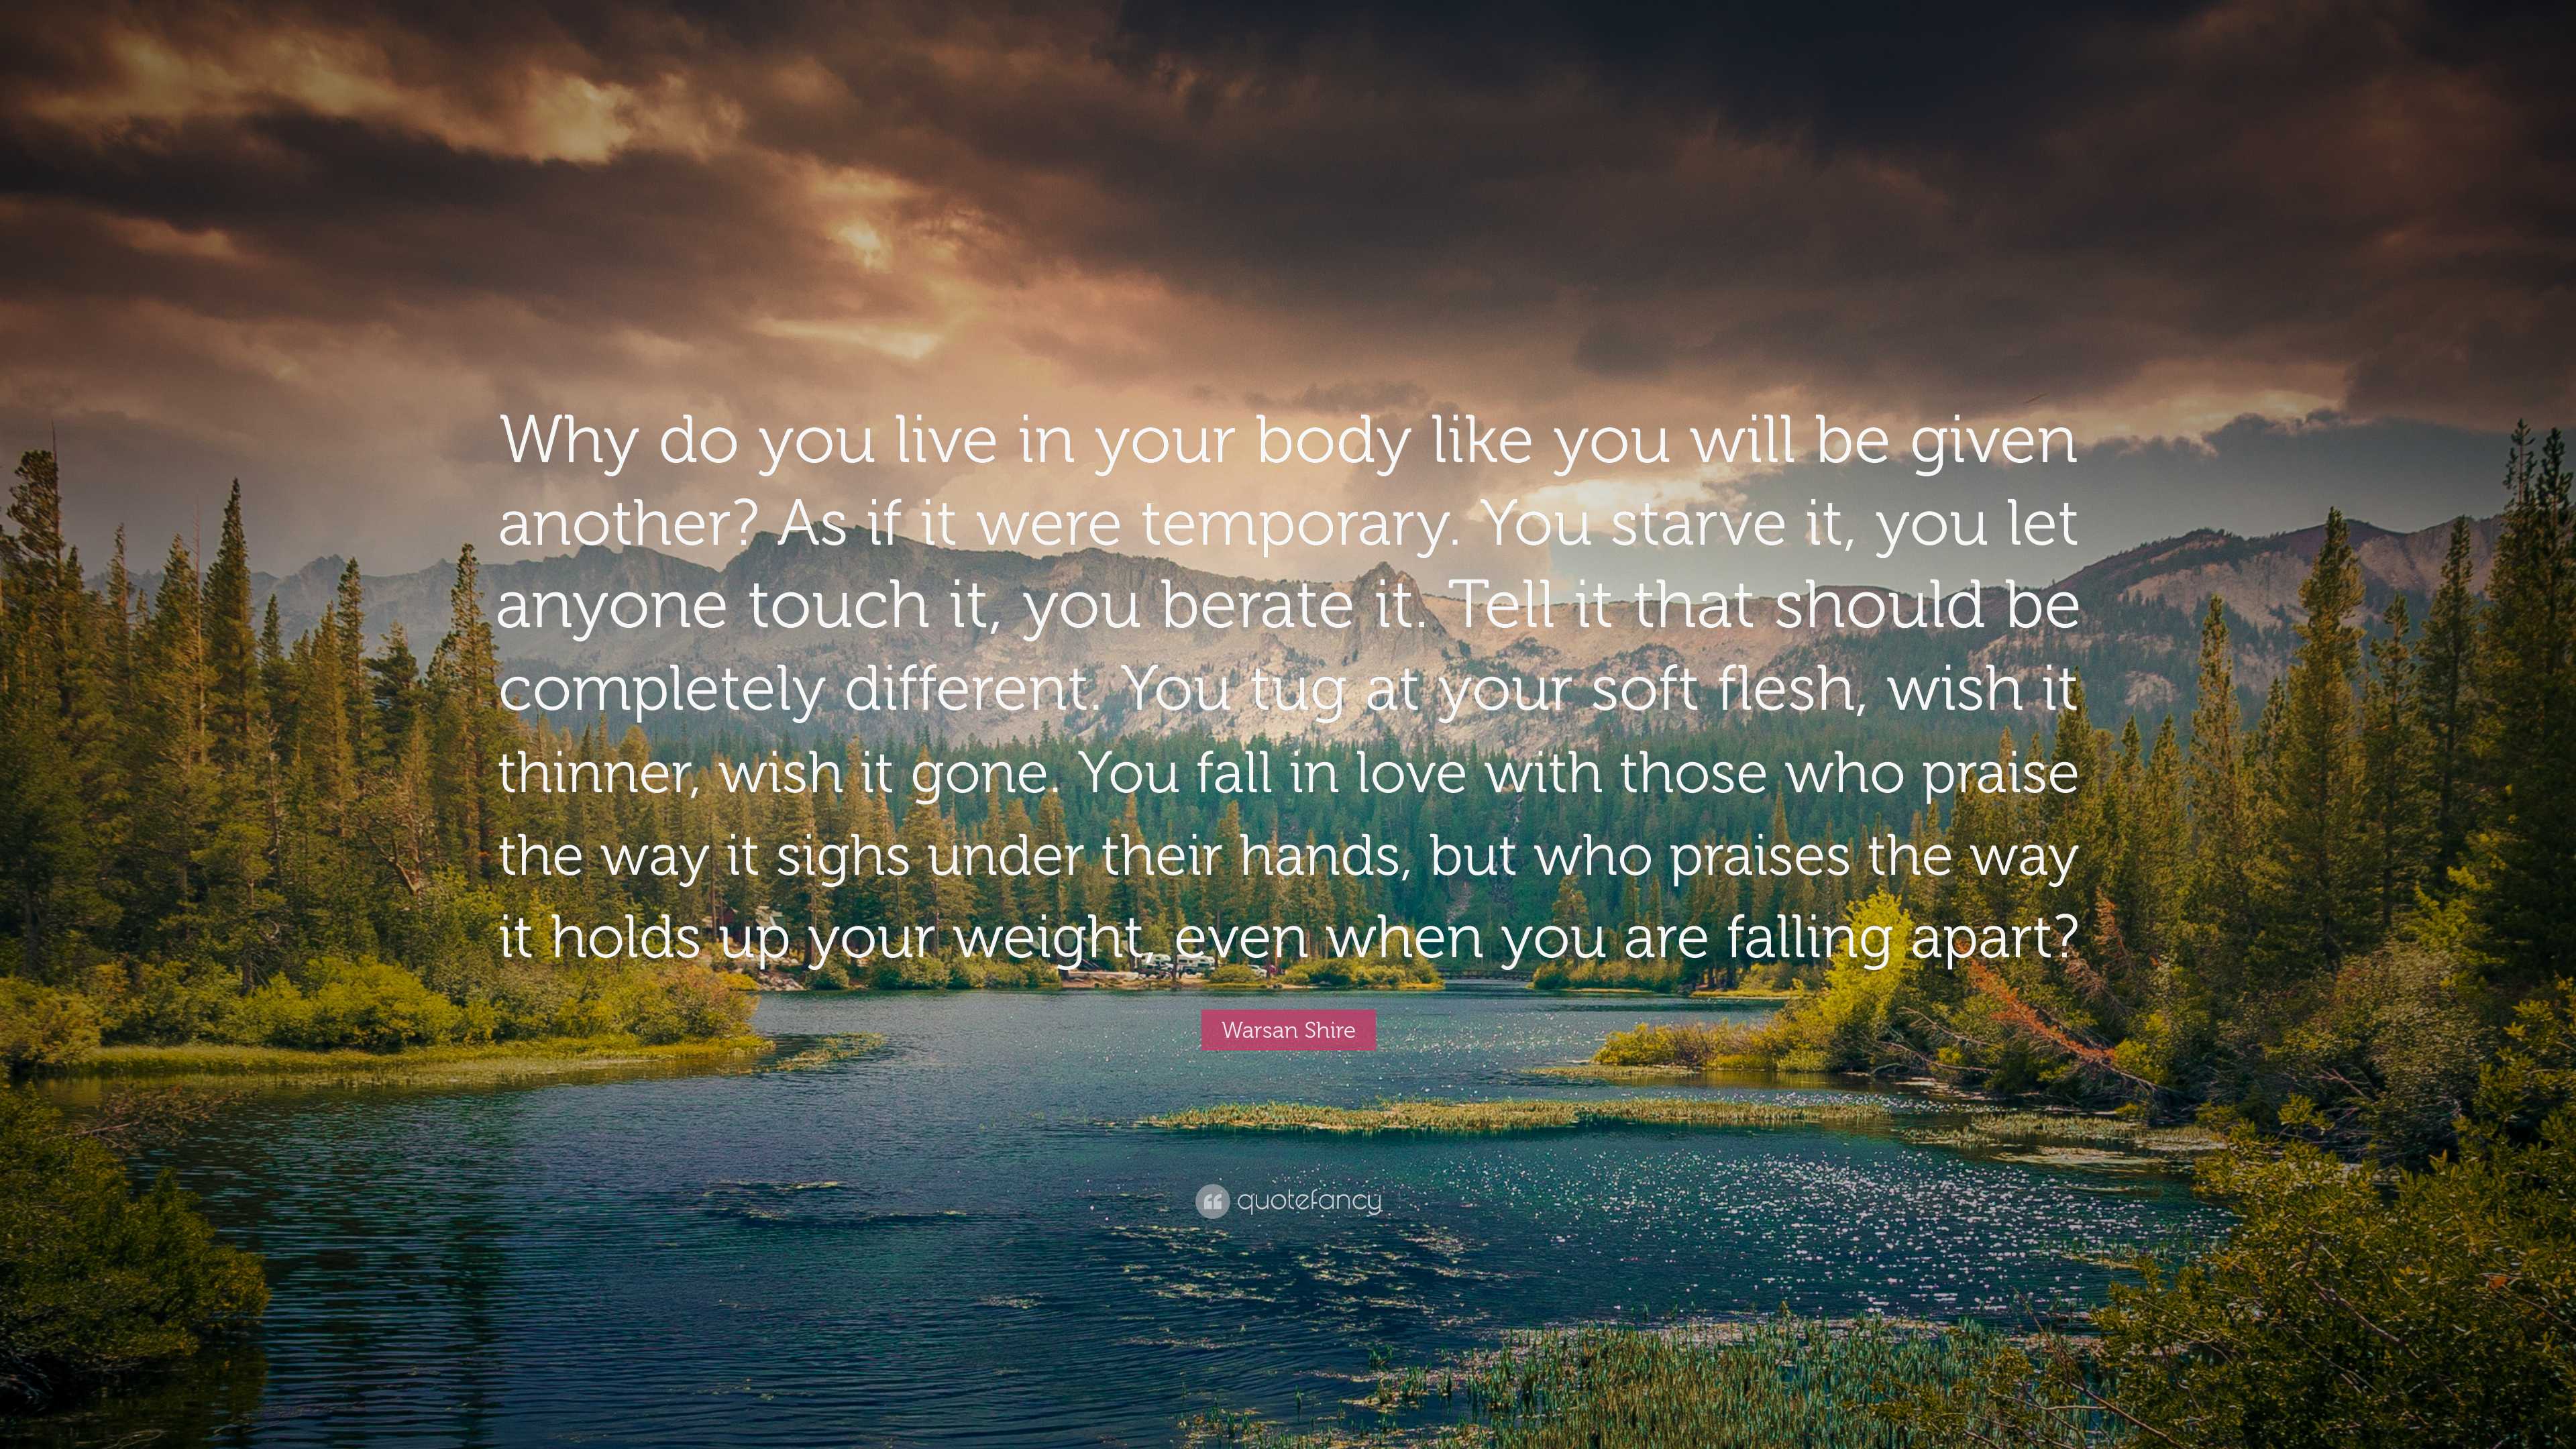 Warsan Shire Quote: “Why do you live in your body like you will be ...